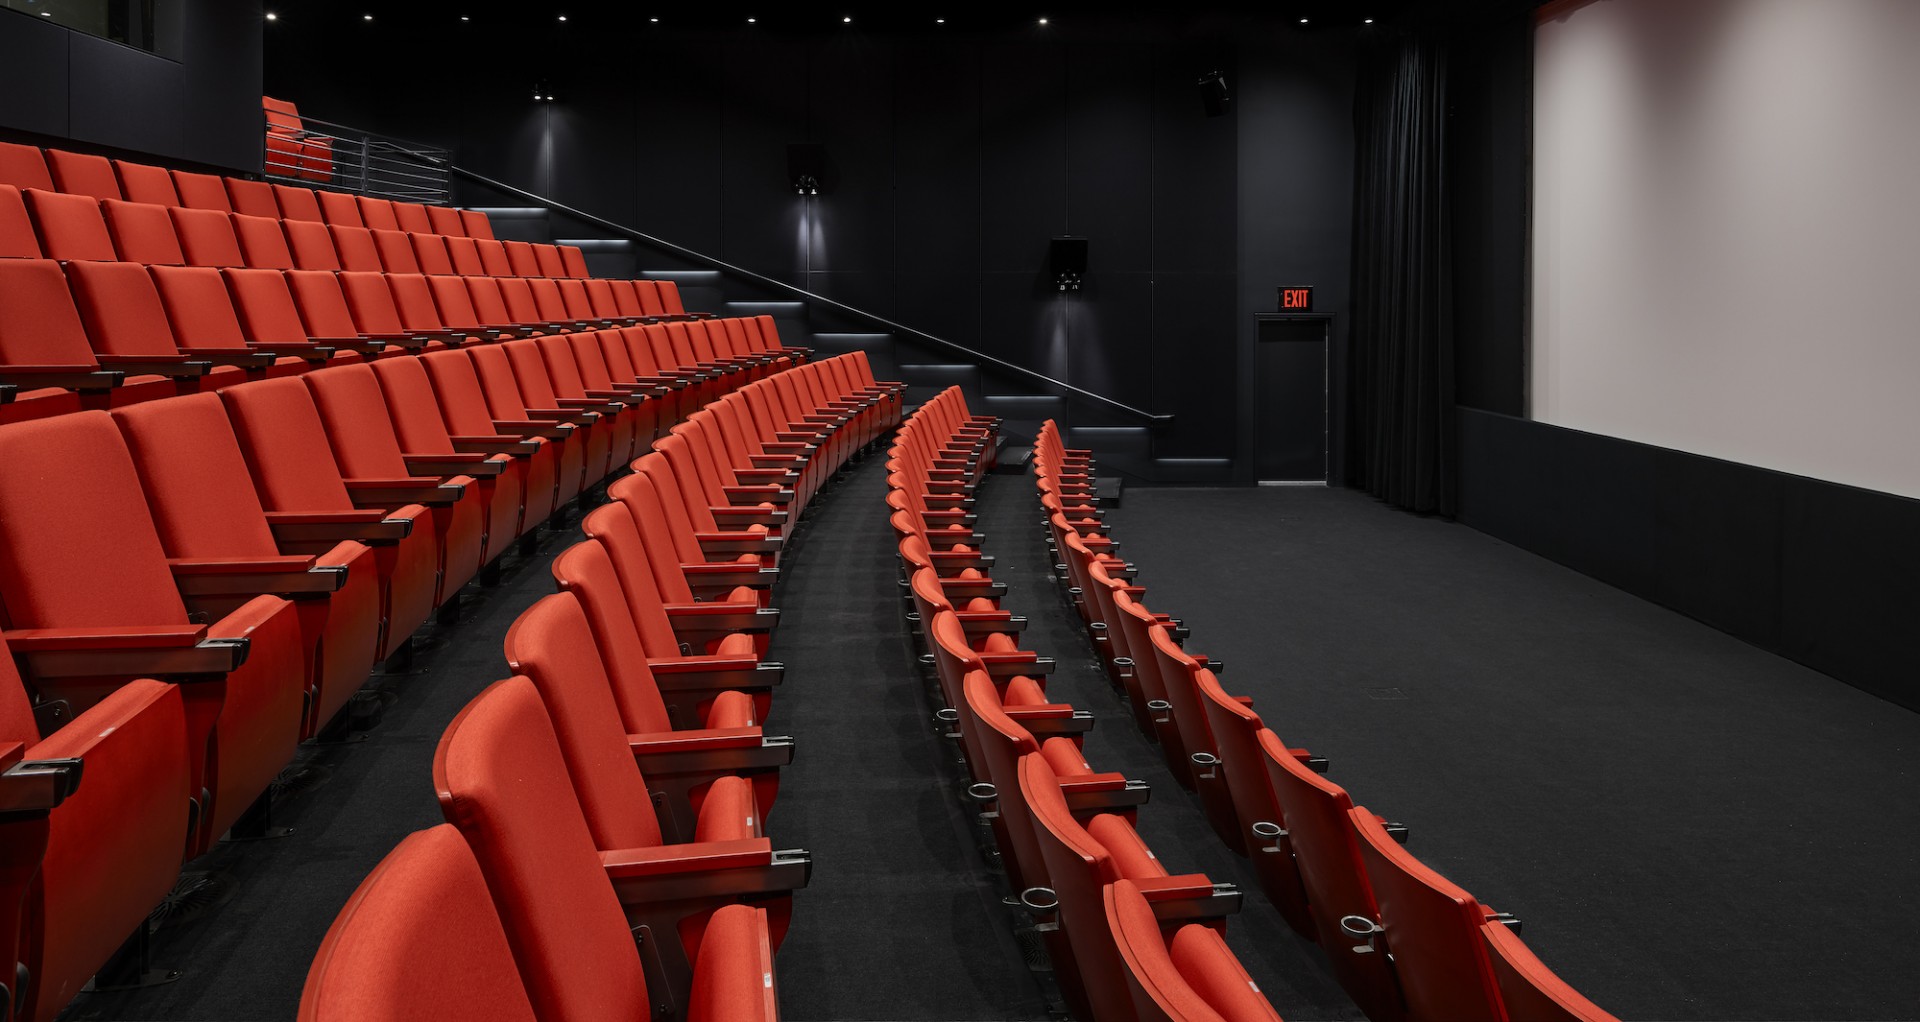 Image of Lenfest Center for the Arts screening room with red stadium-seating chairs and a blank screen.